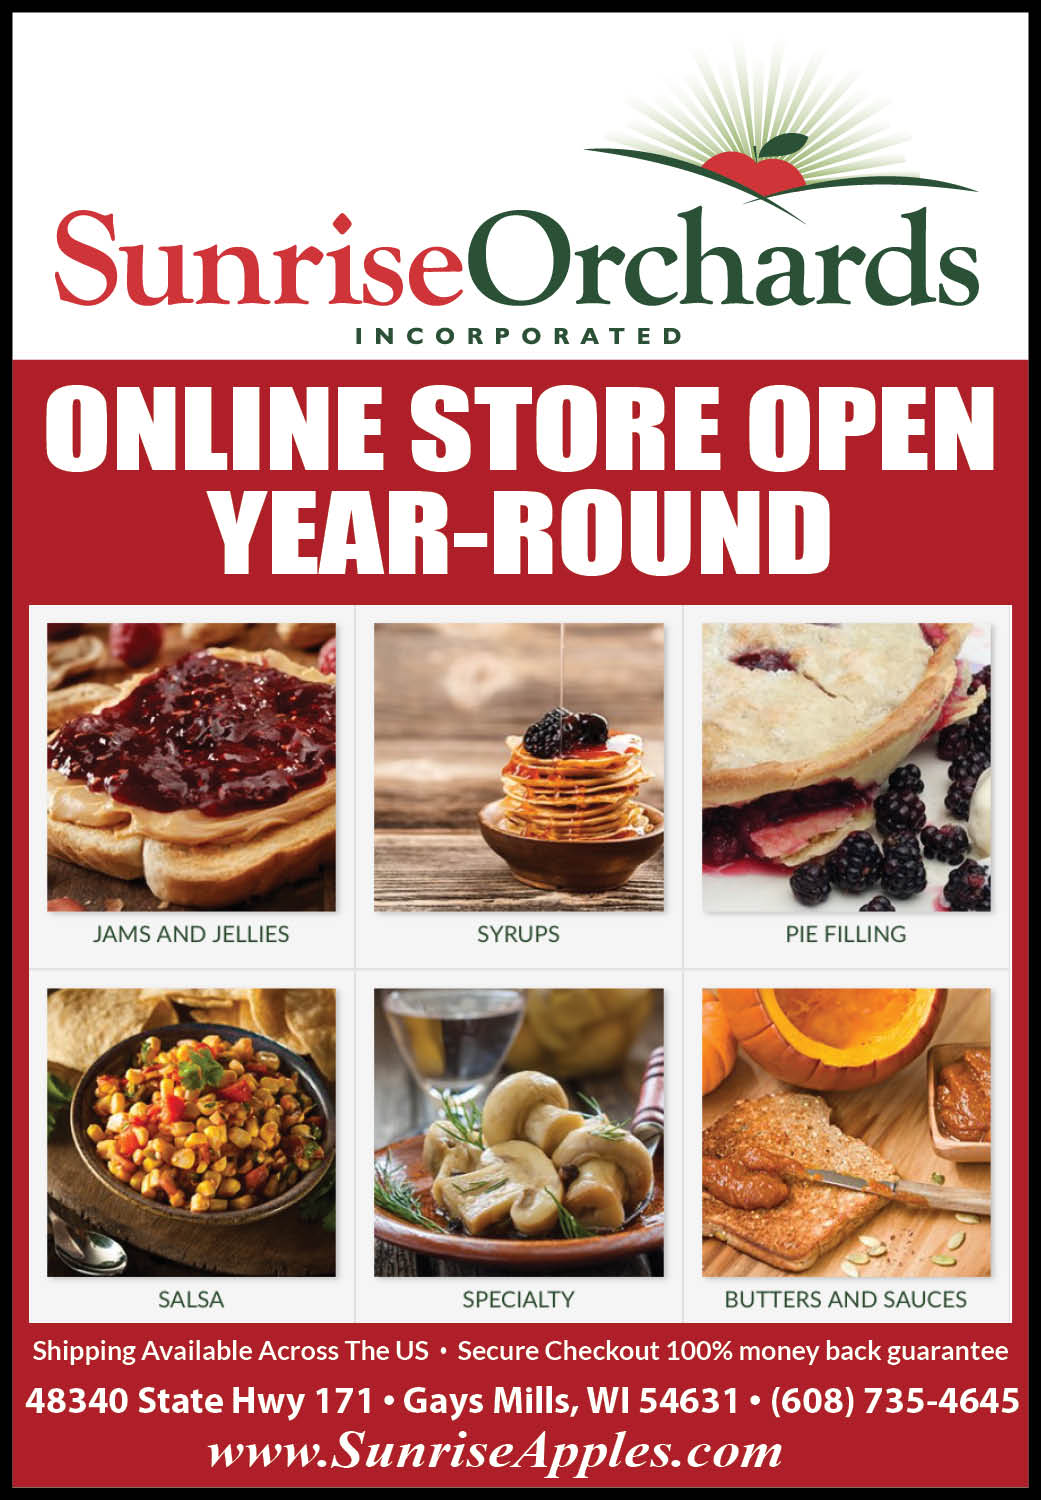 Shop Sunrise Orchards All Year Long!